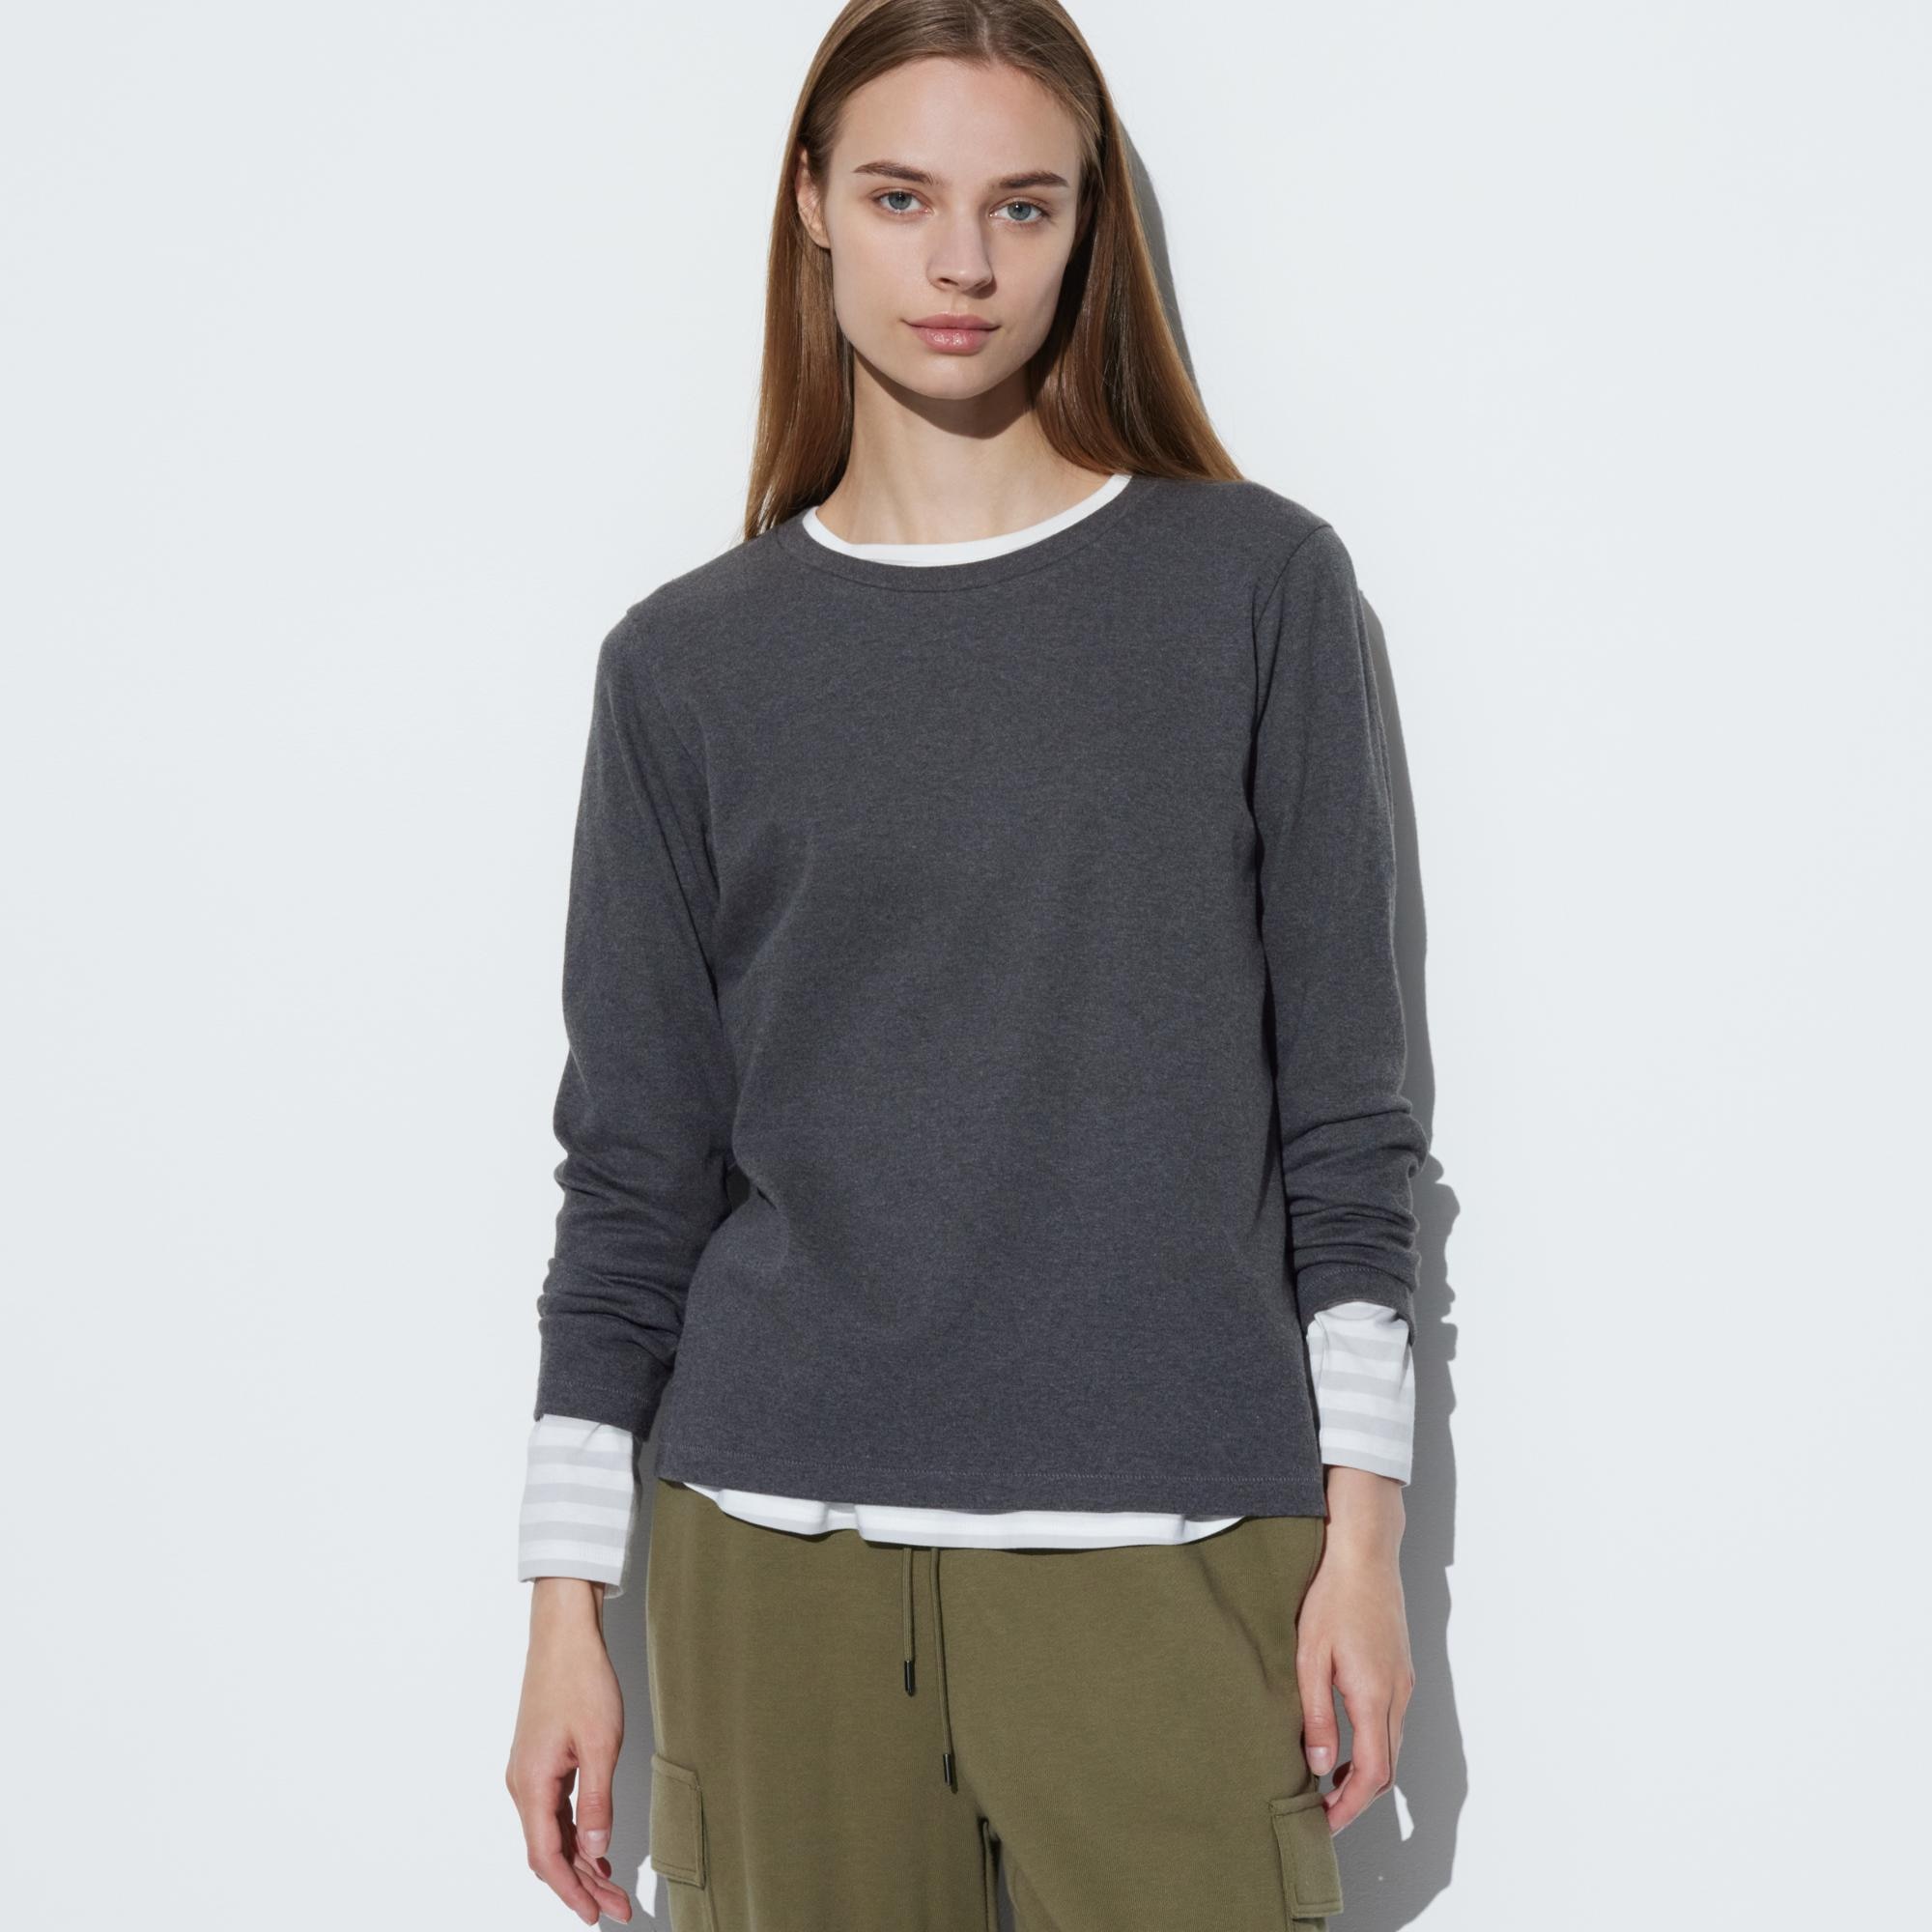 Smooth Stretch Cotton Turtleneck Long-Sleeve T-Shirt